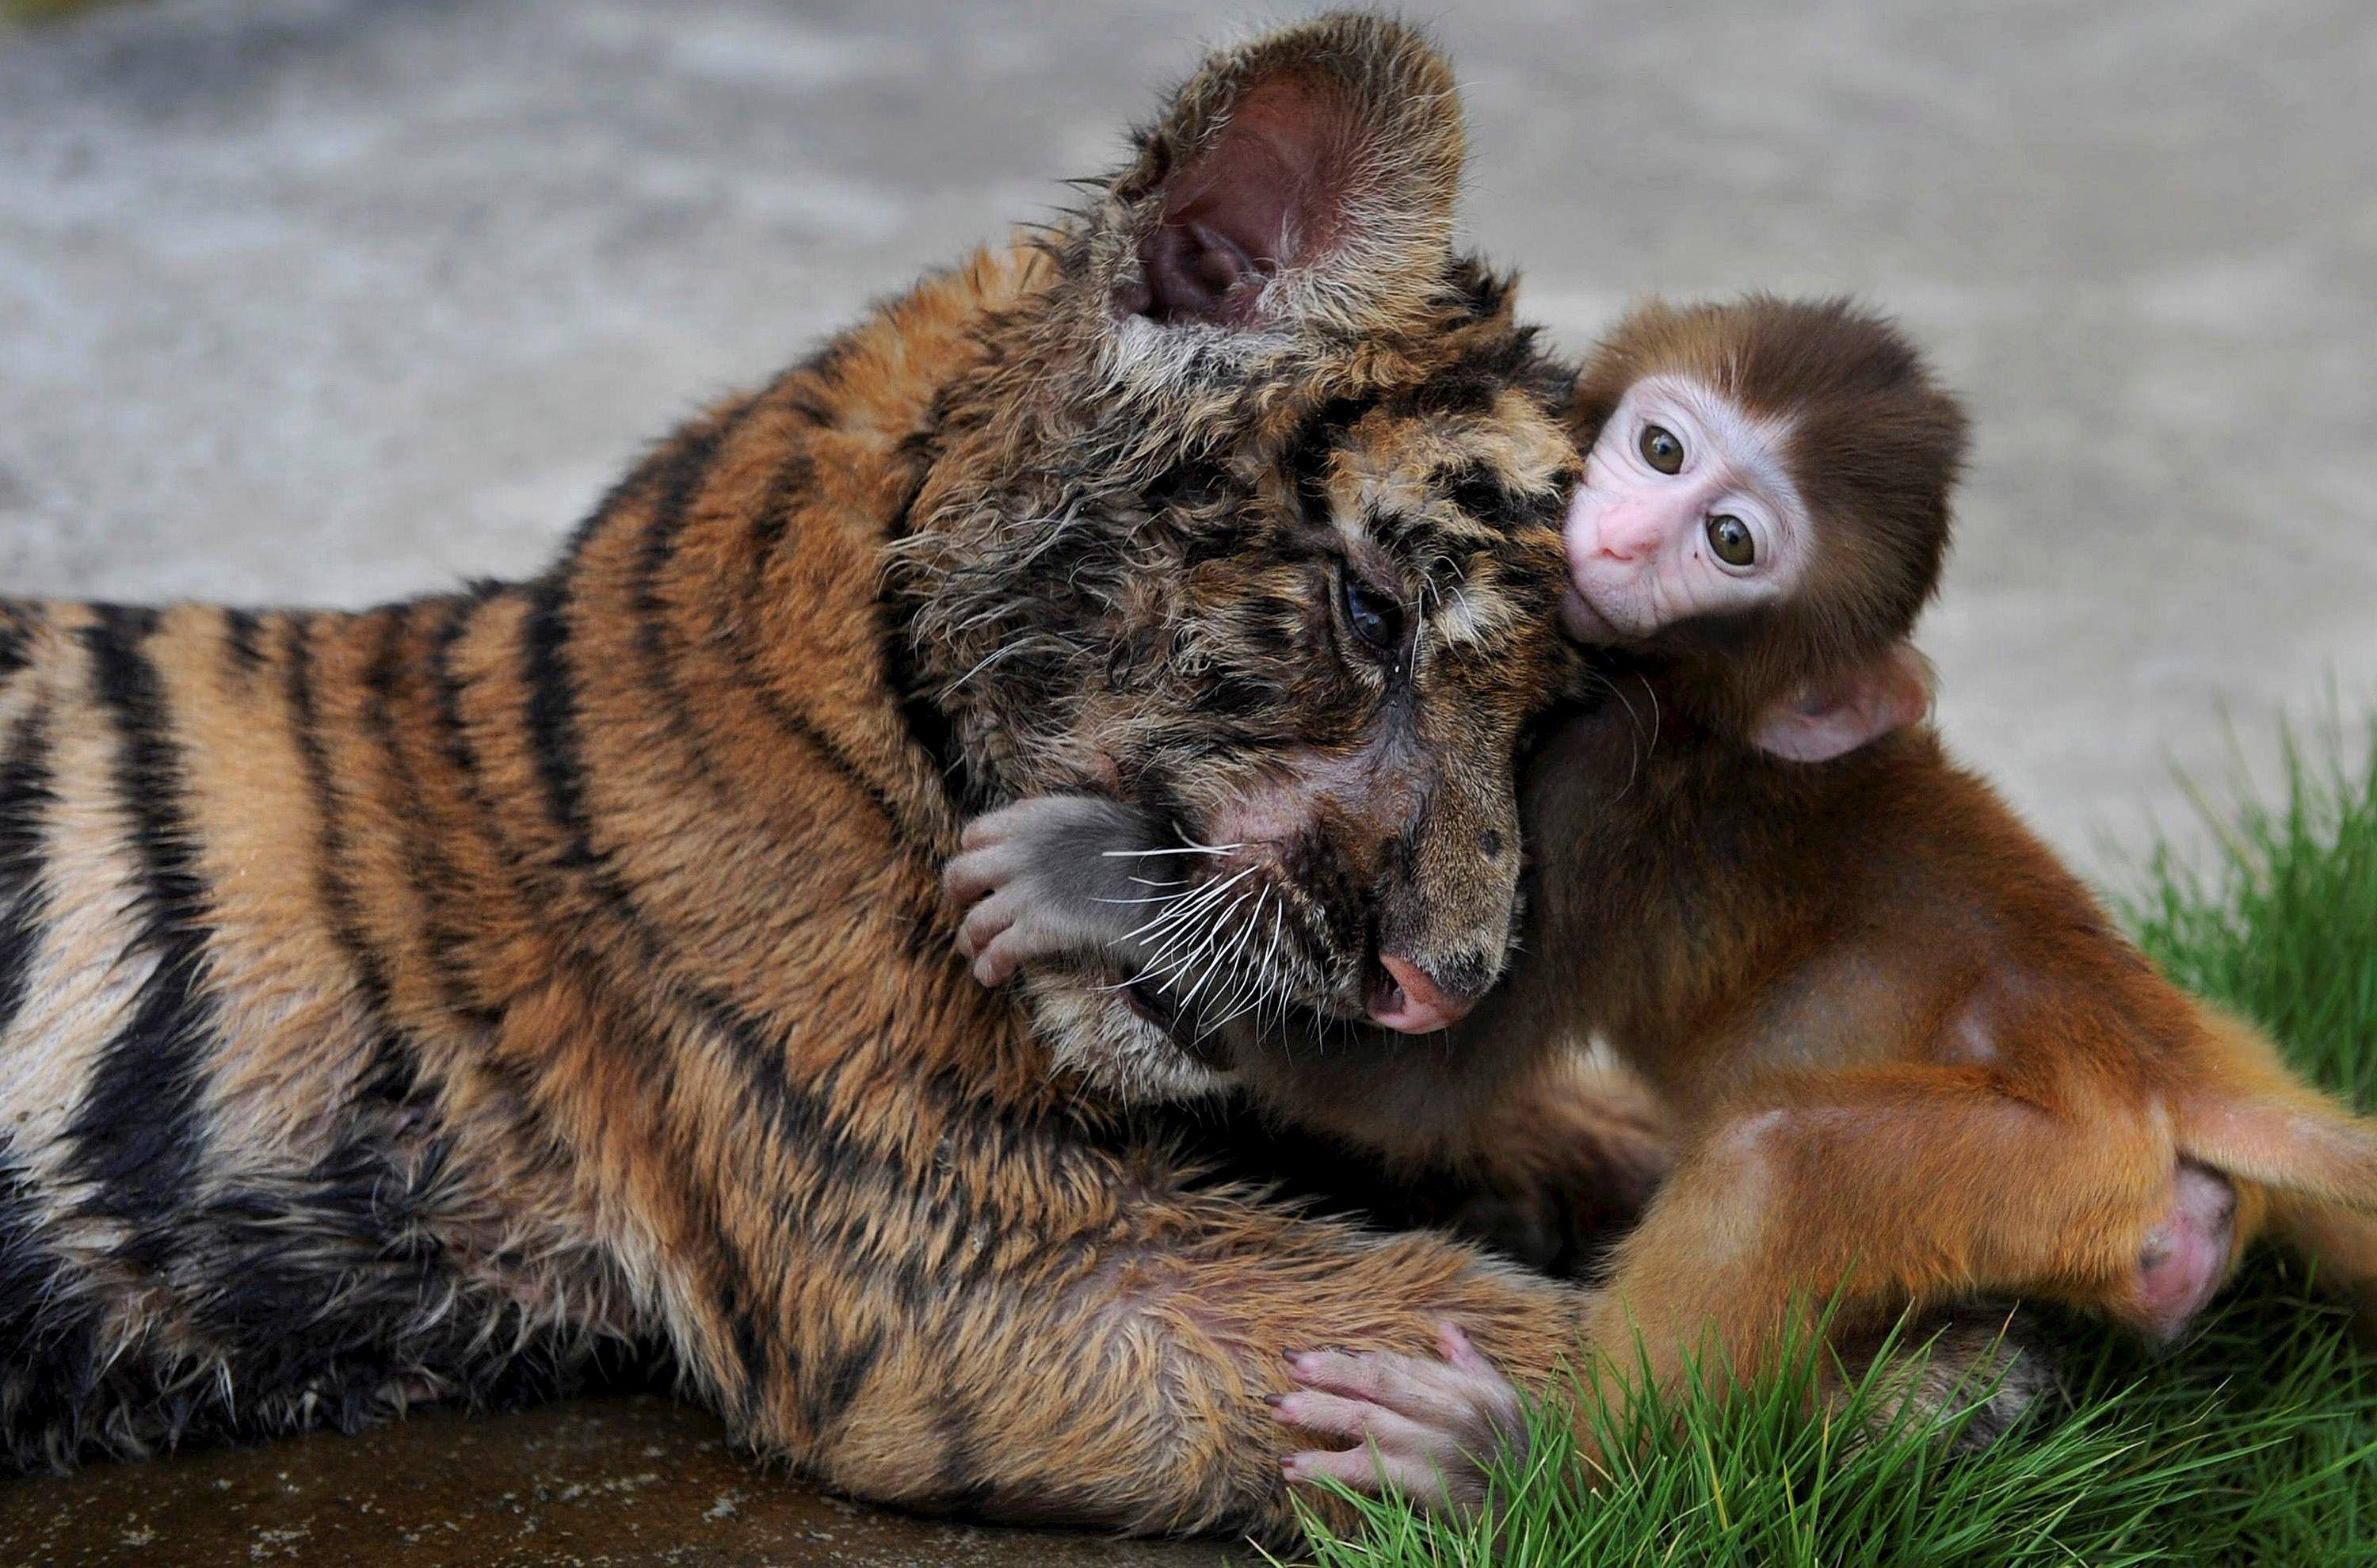 Cute Tiger Cub Playing with Monkey Animal Photo. HD Famous Wallpaper